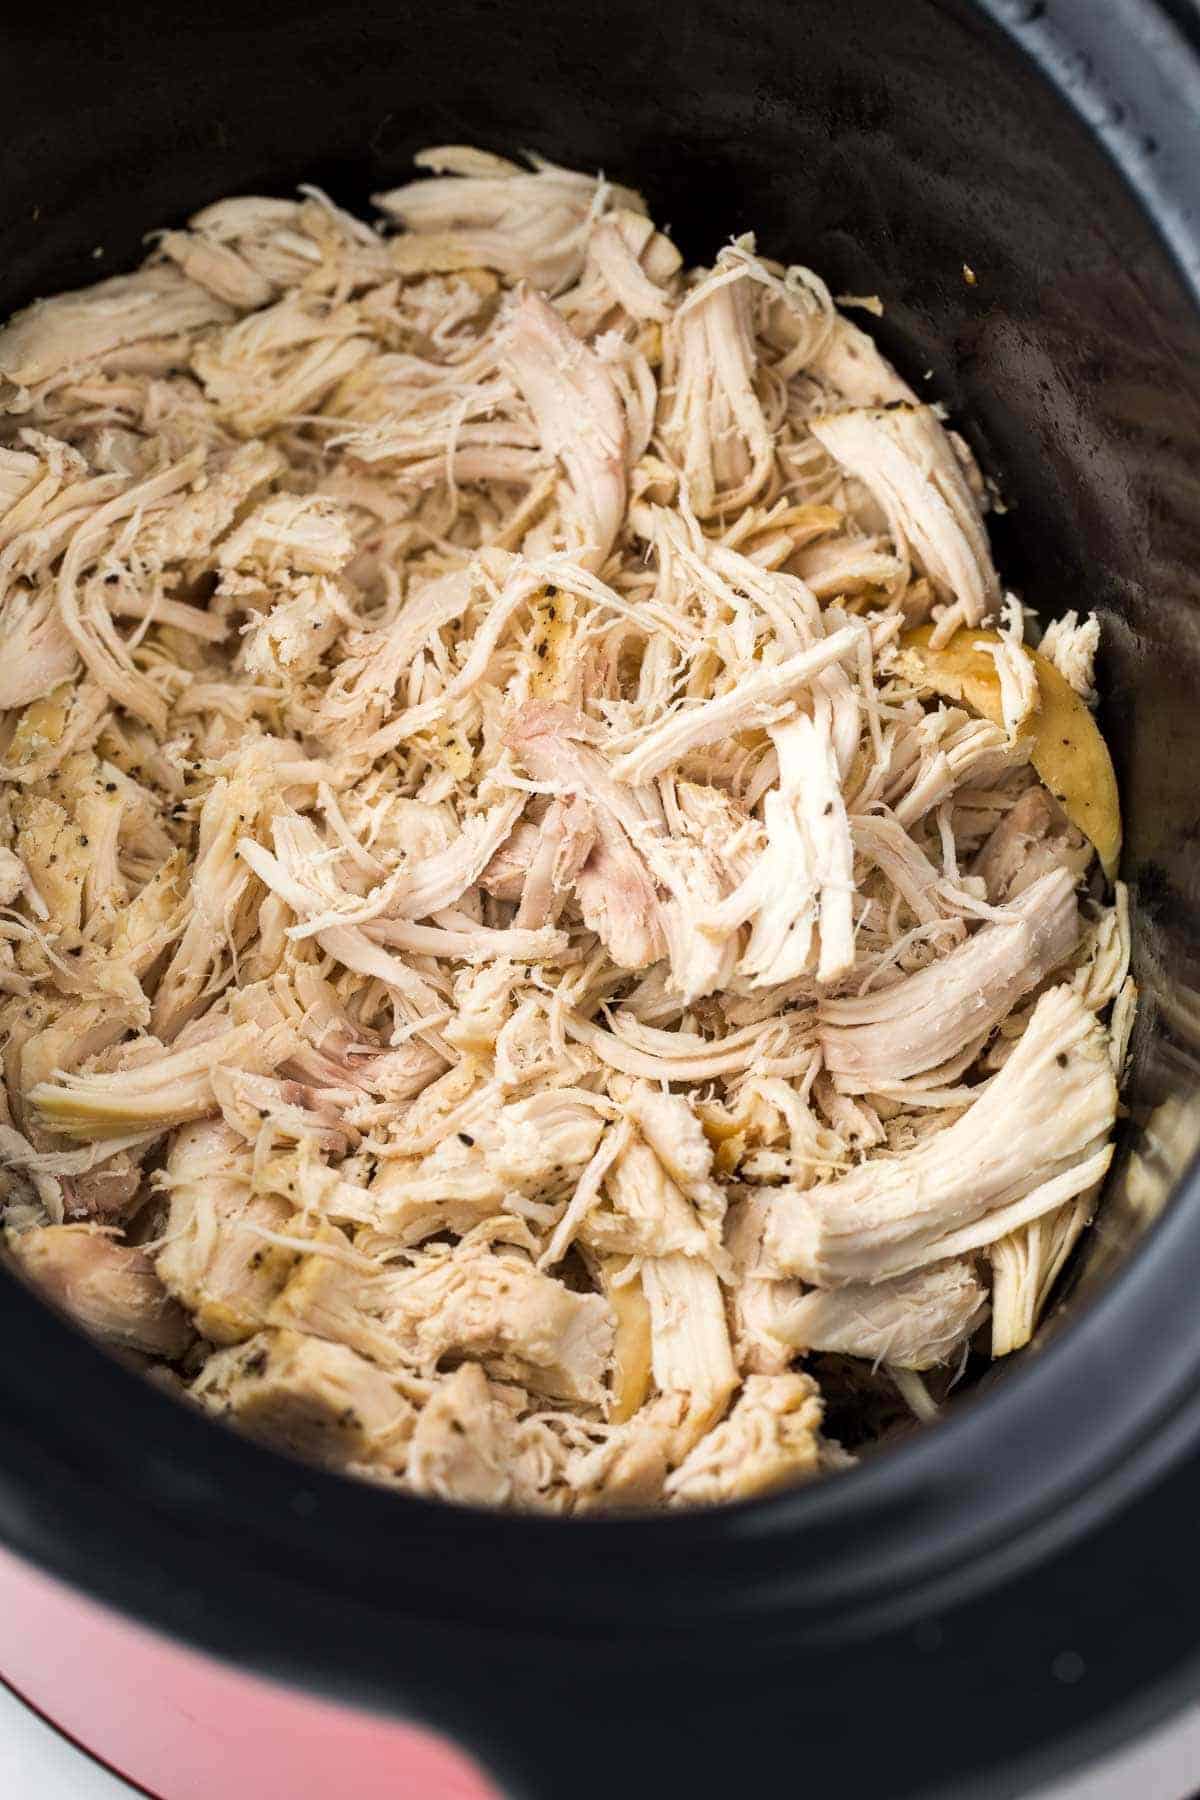 Shredded chicken in the slow cooker